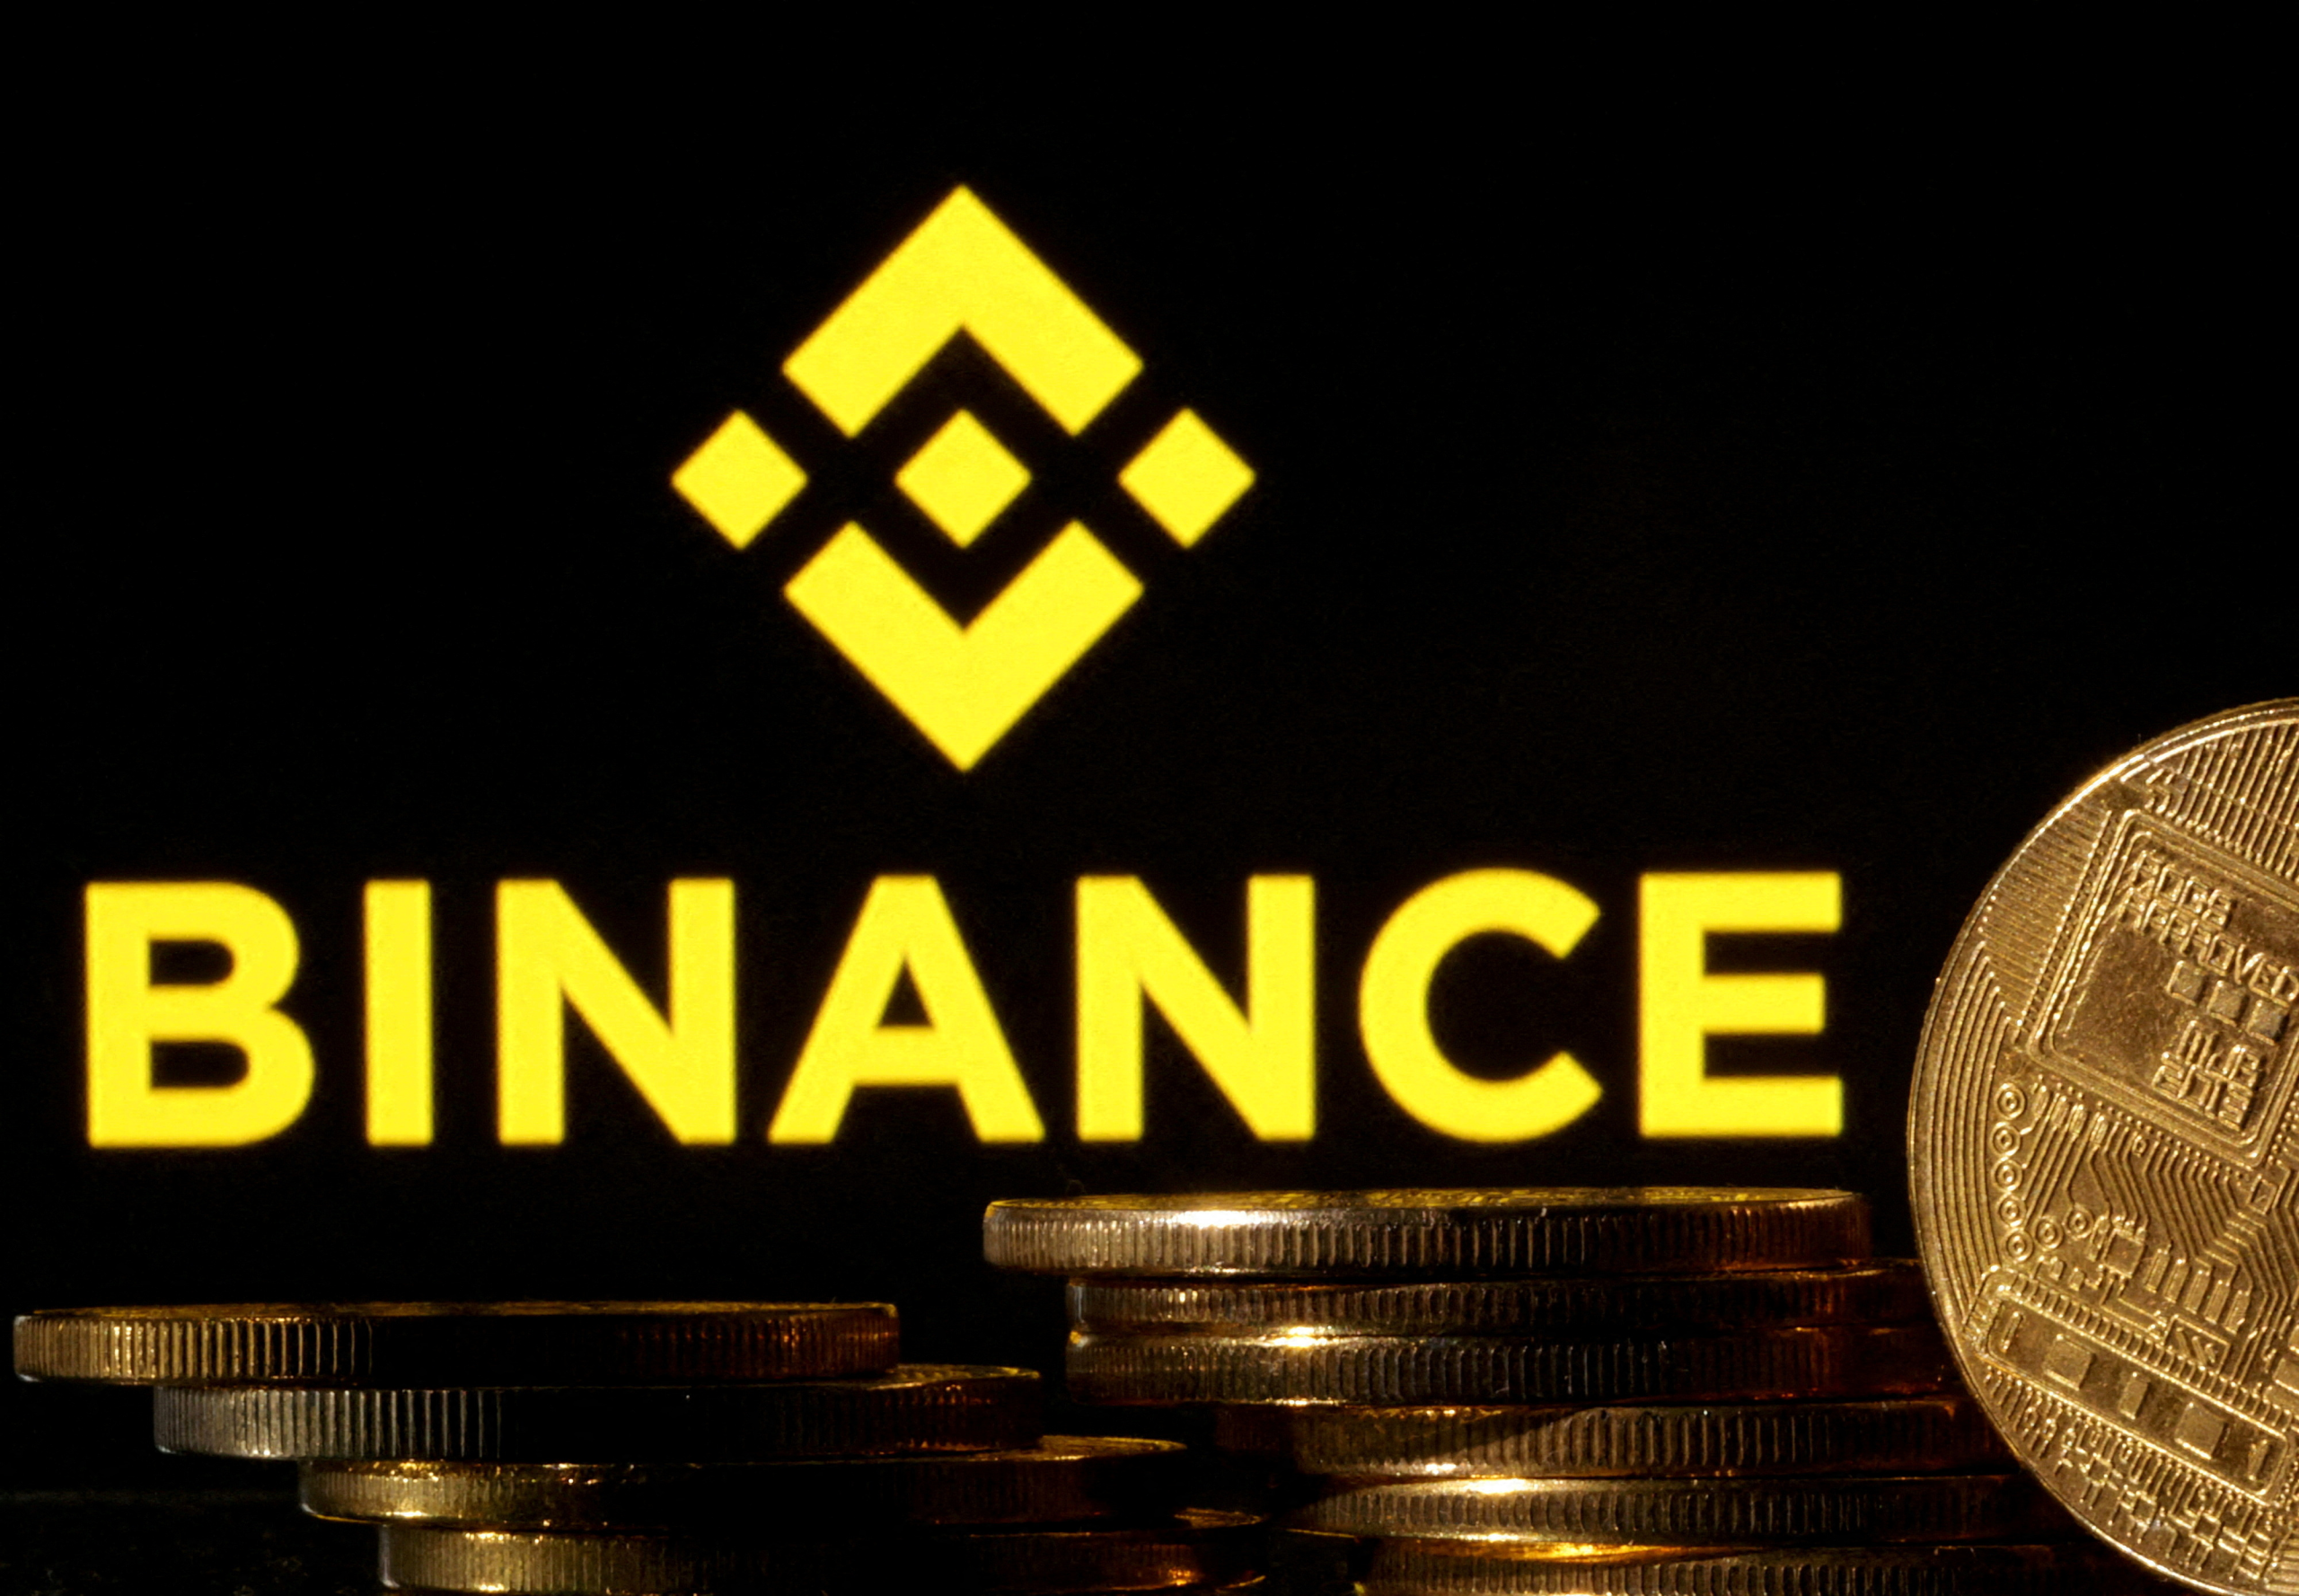 Binance reopened after temporarily suspending spot trading, deposits and withdrawals due to a bug in its system